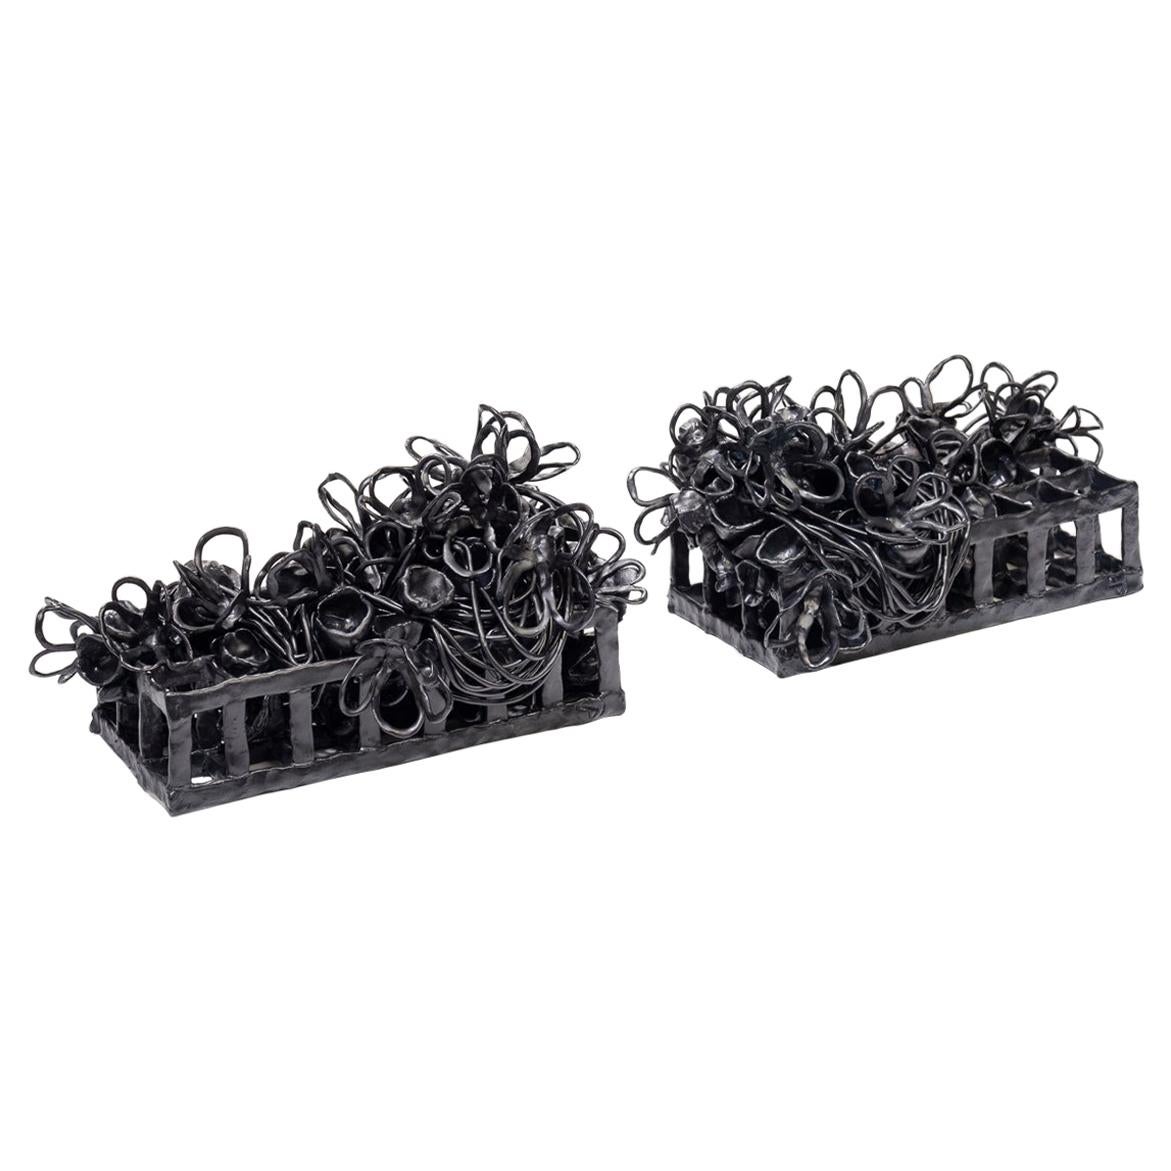 Joanna Poag Binding Time (Black Grid w/ Flowers and Pods) Ceramic Sculpture,2019